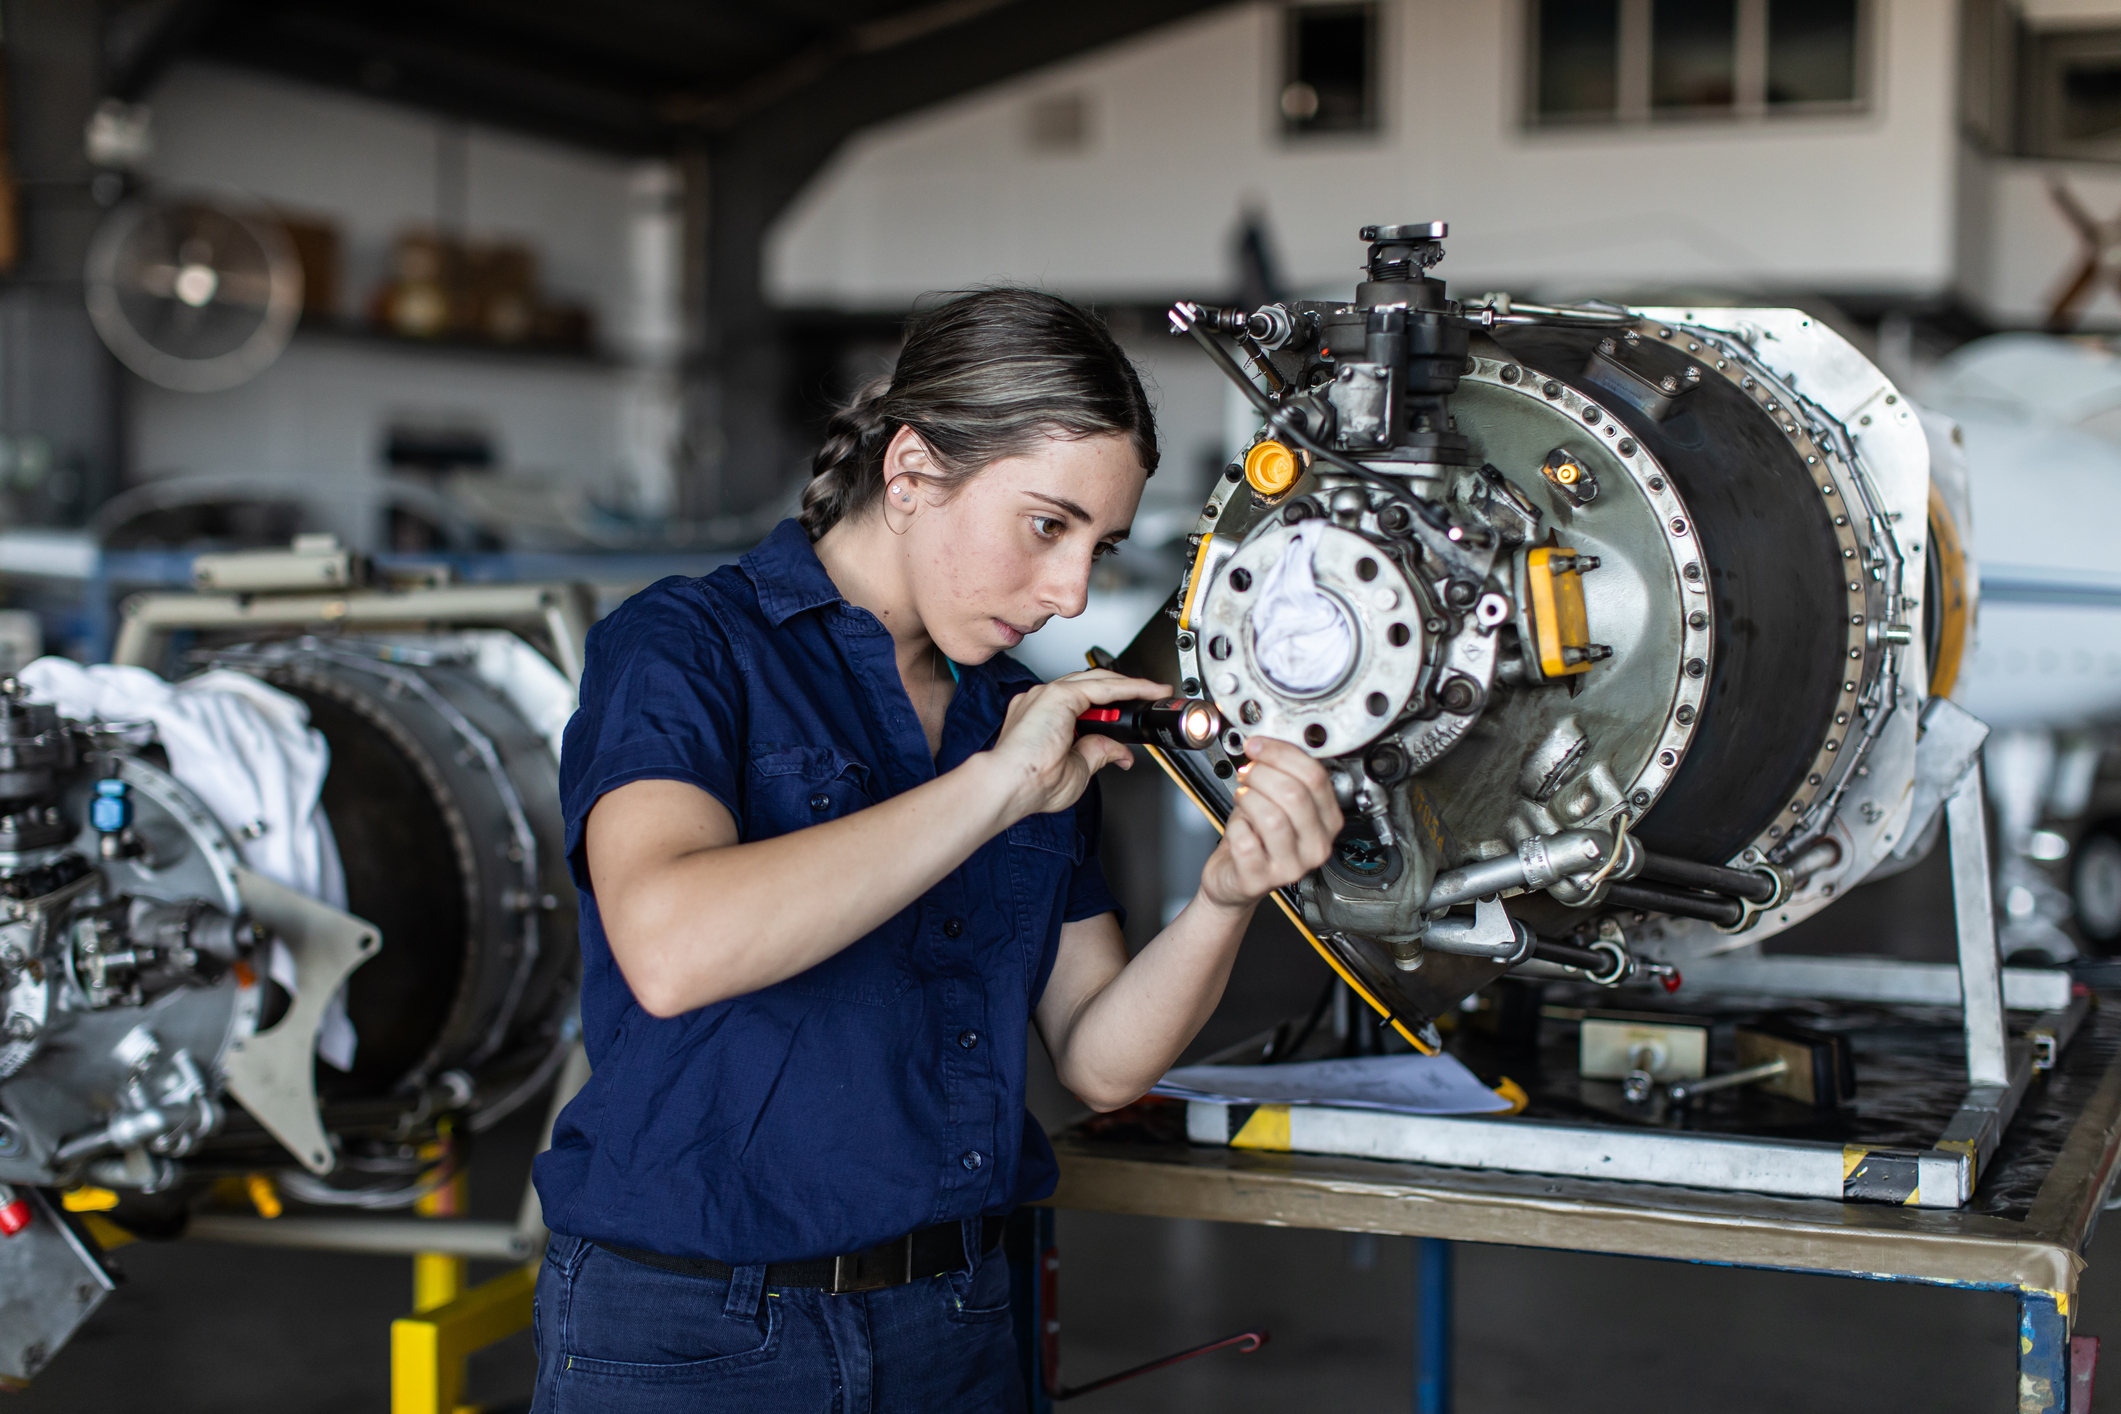 Young female aircraft engineer apprentice at work